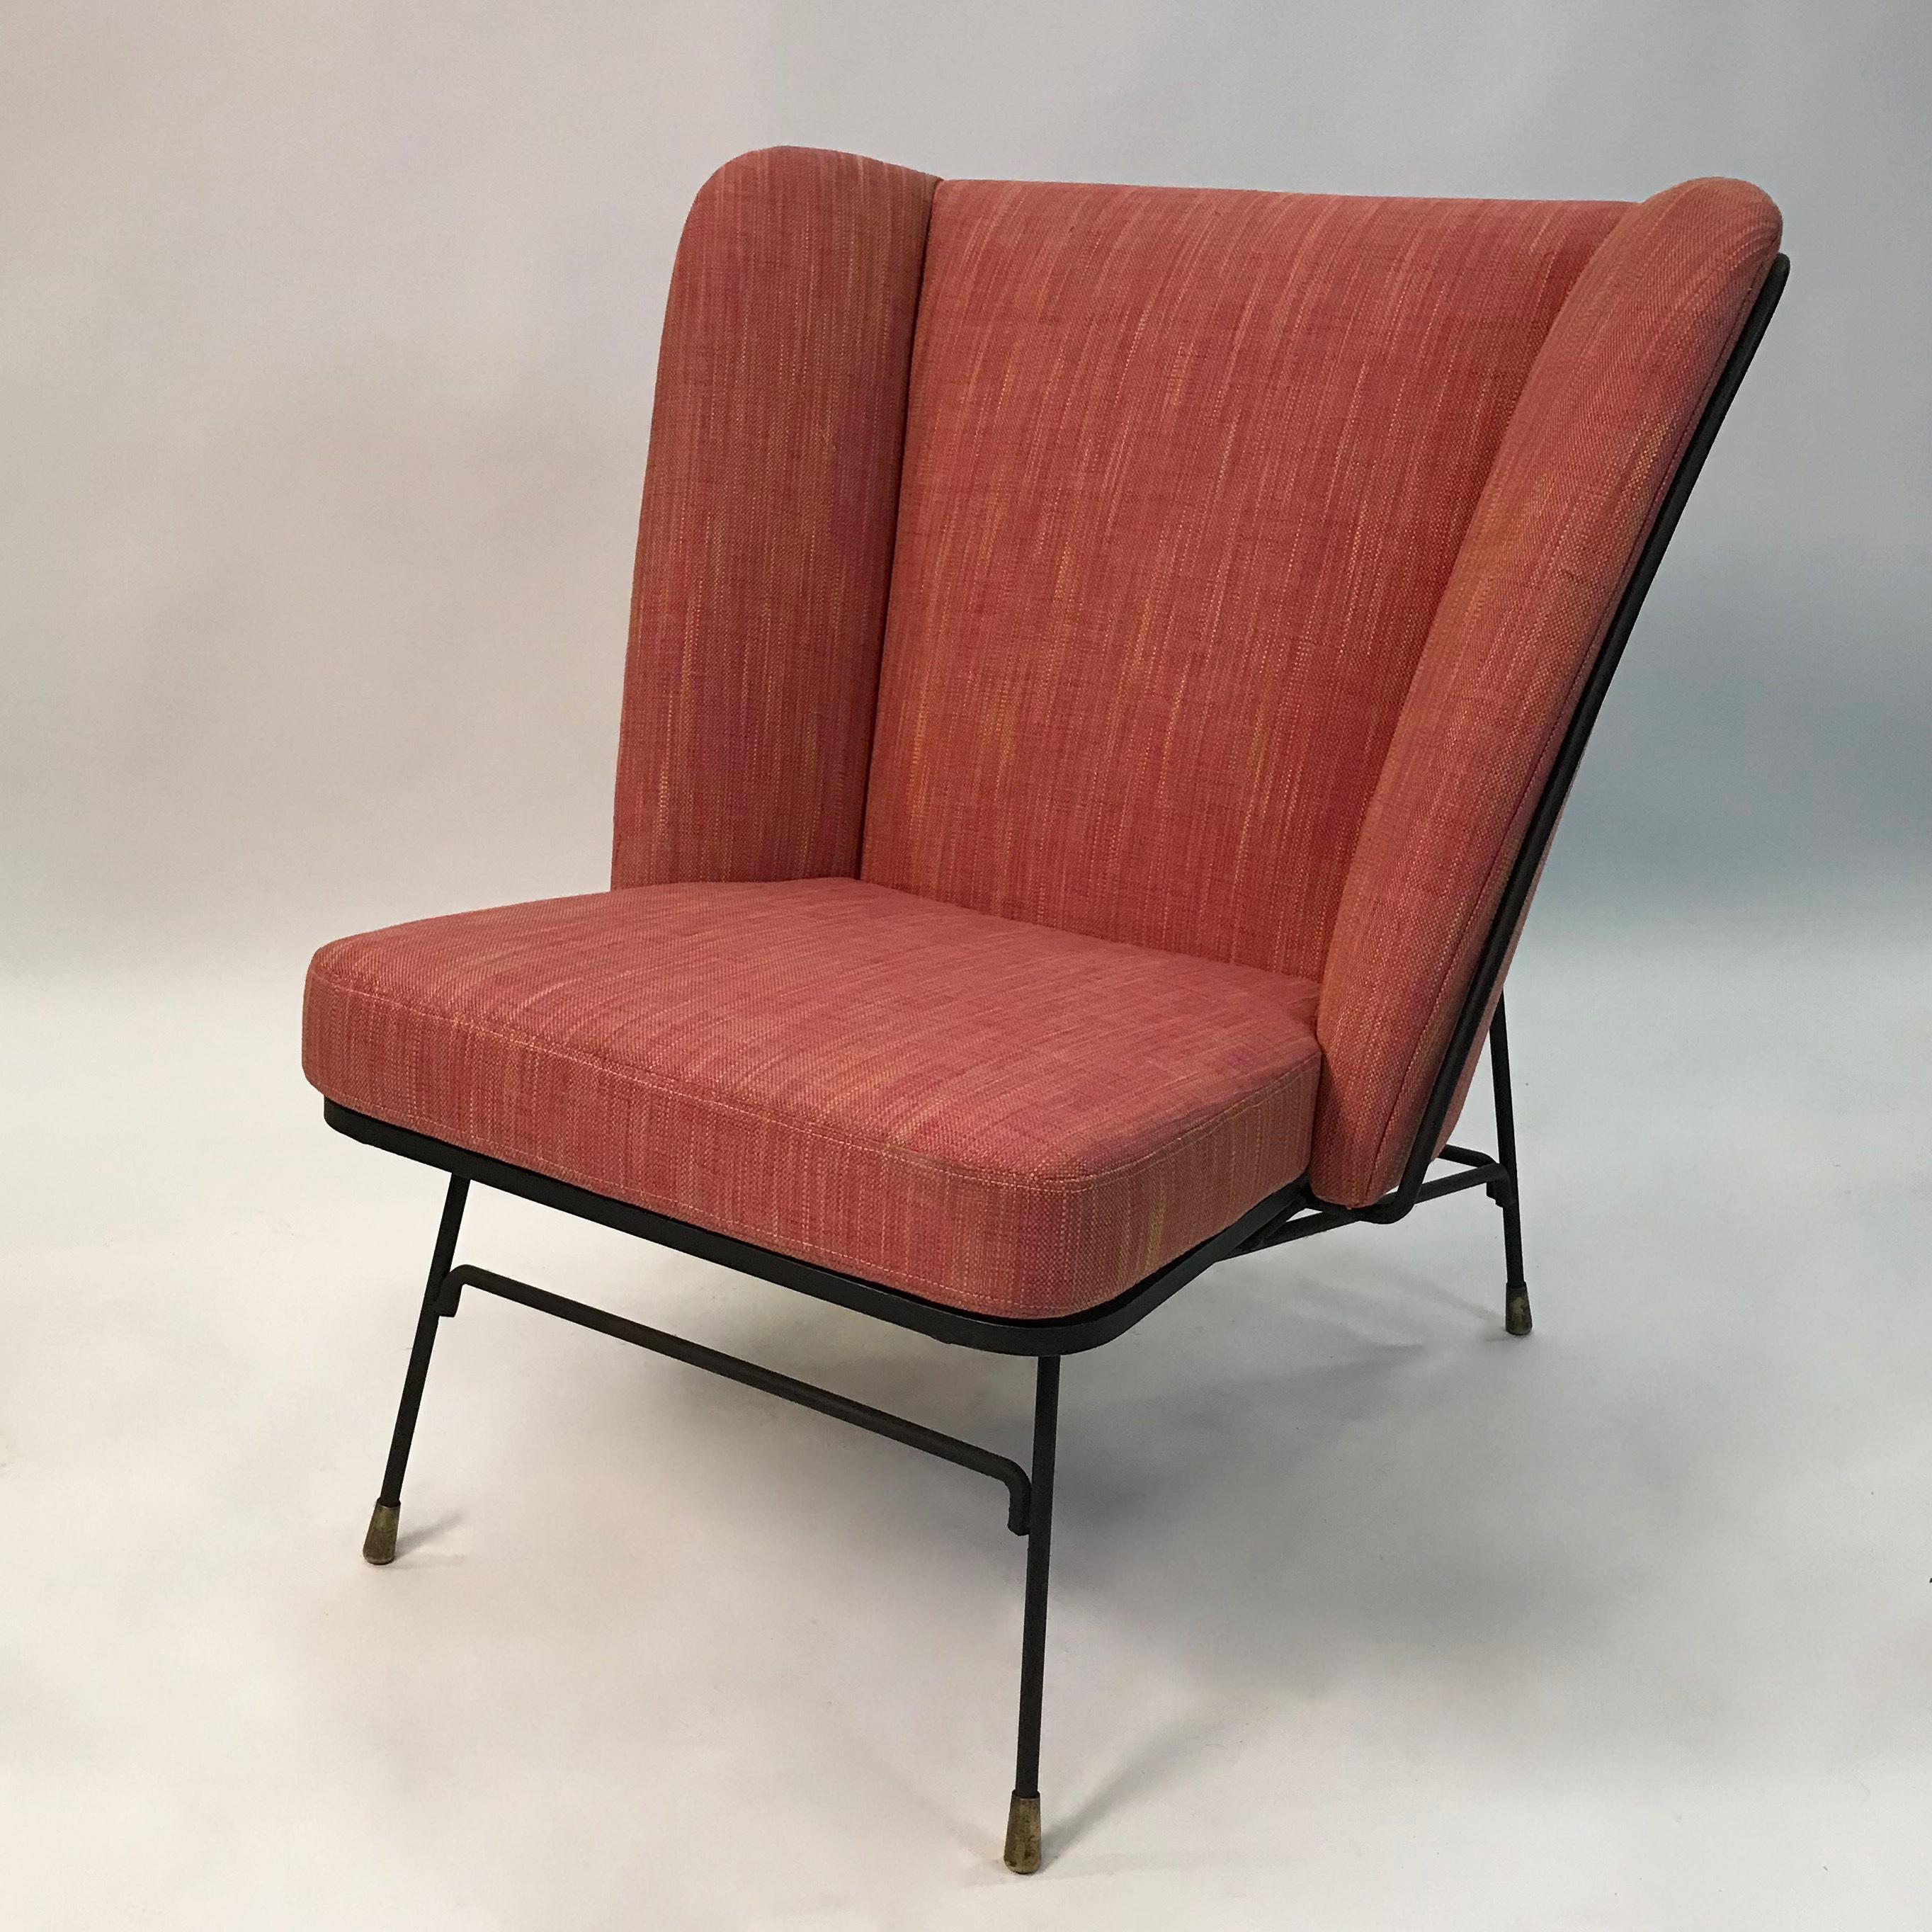 Mid-Century Modern, high, wingback, lounge chair features a minimal, wrought iron frame newly upholstered in a raspberry, cotton linen blend. Is attributed to Adrian Pearsall.